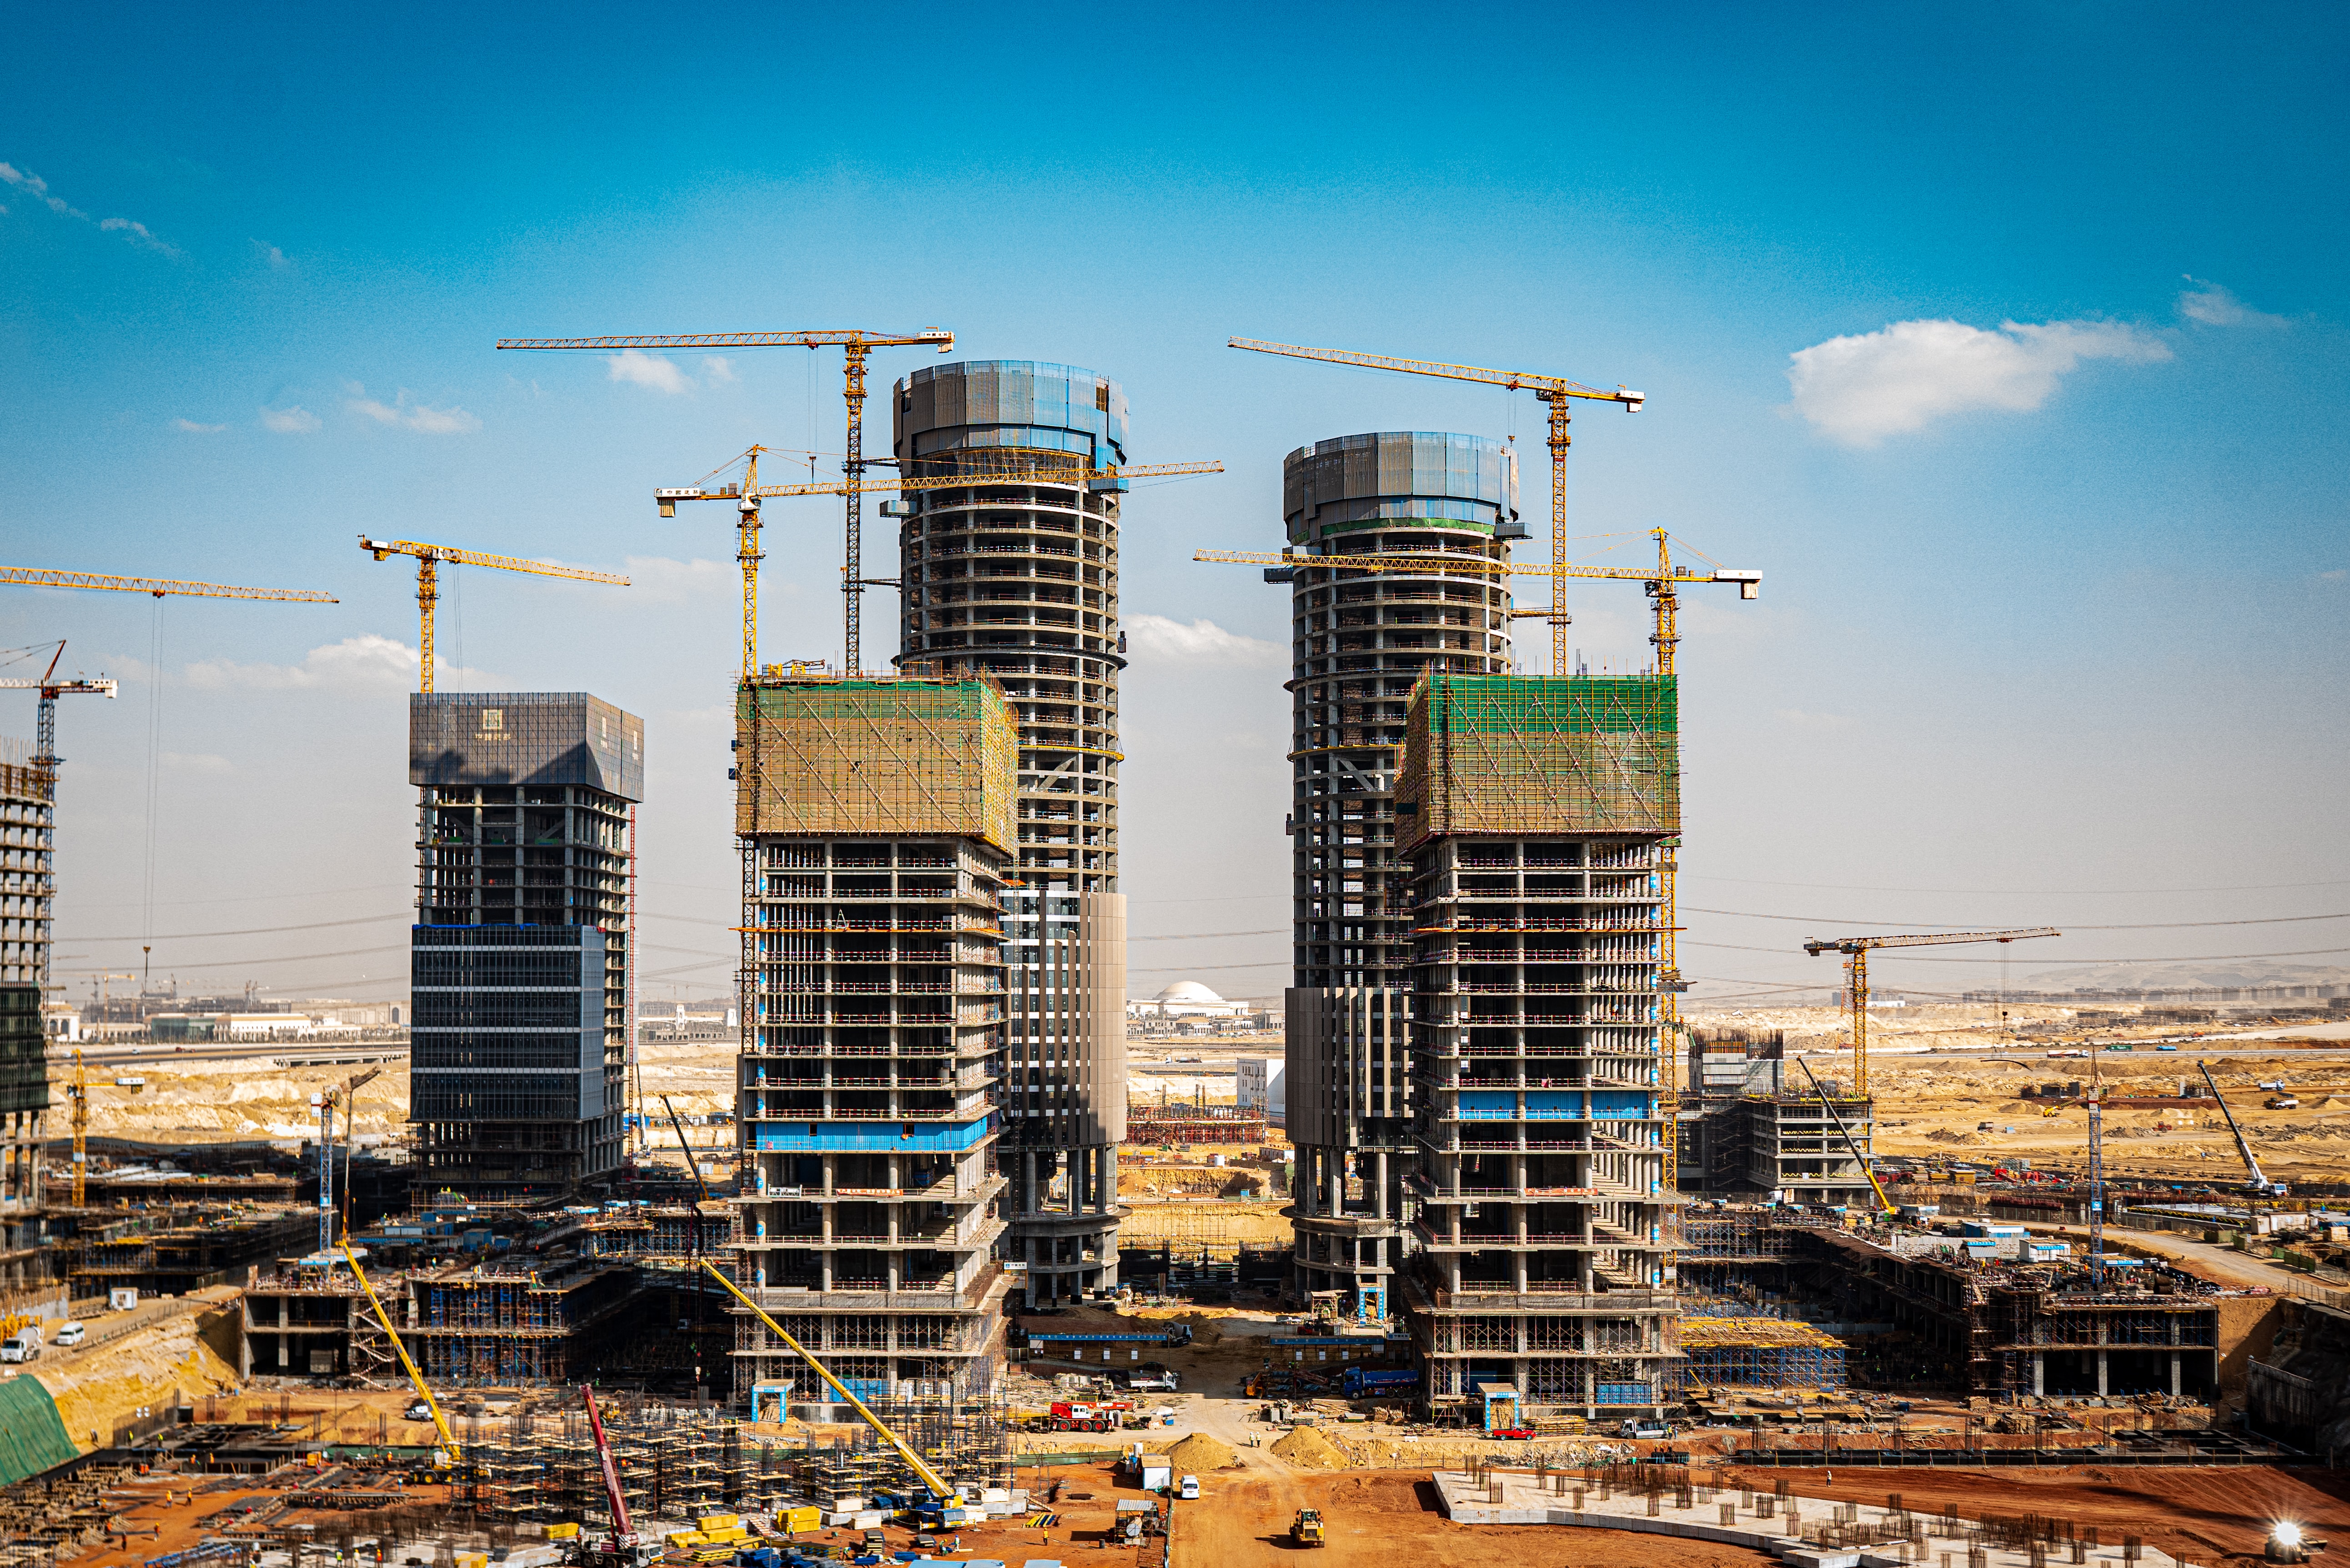 Five largest multi-family housing construction projects initiated globally in Q2 2022